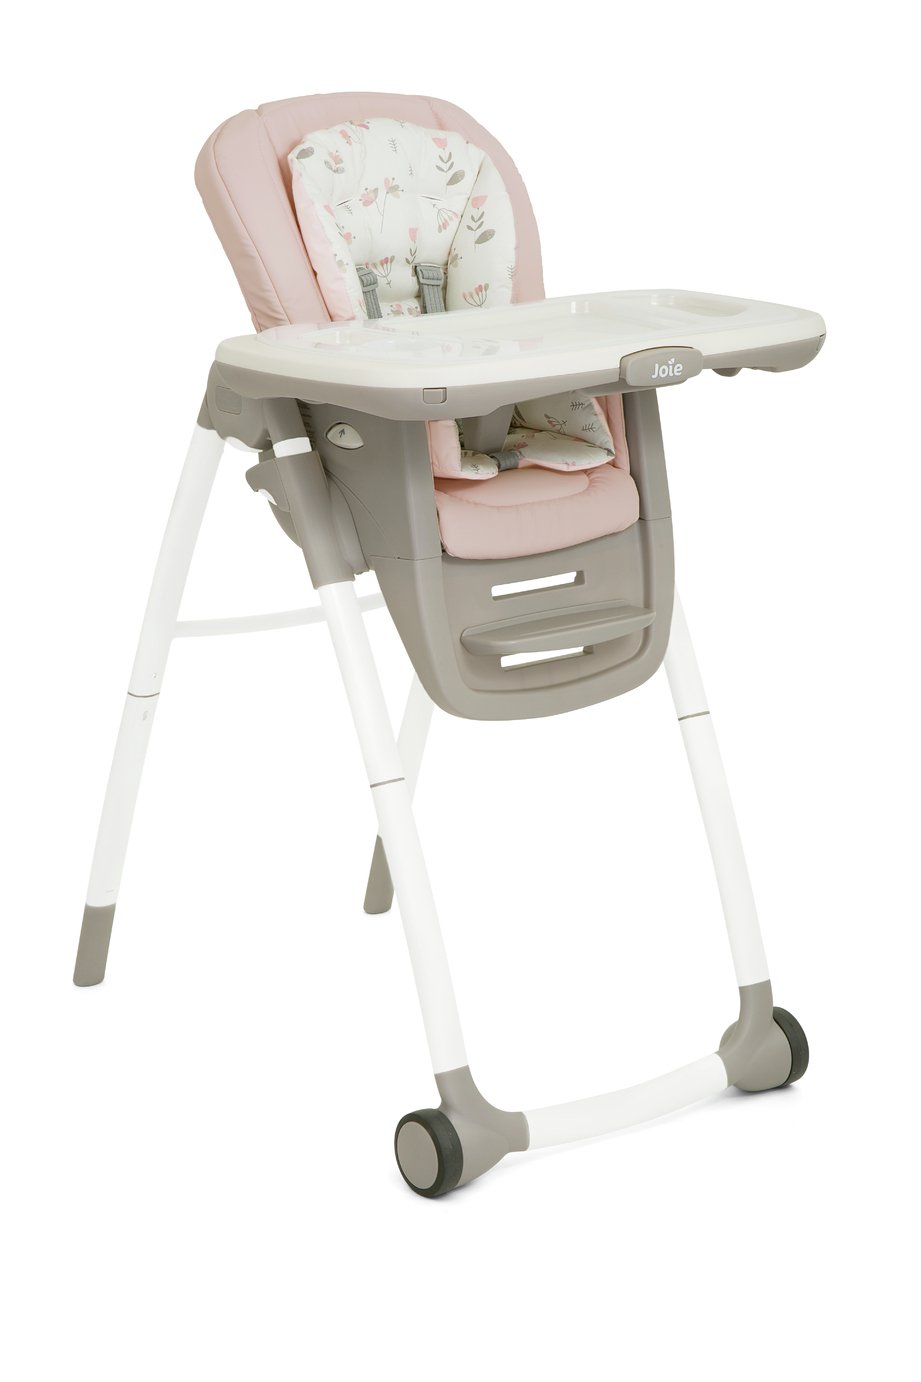 Joie Multiply Highchair Review